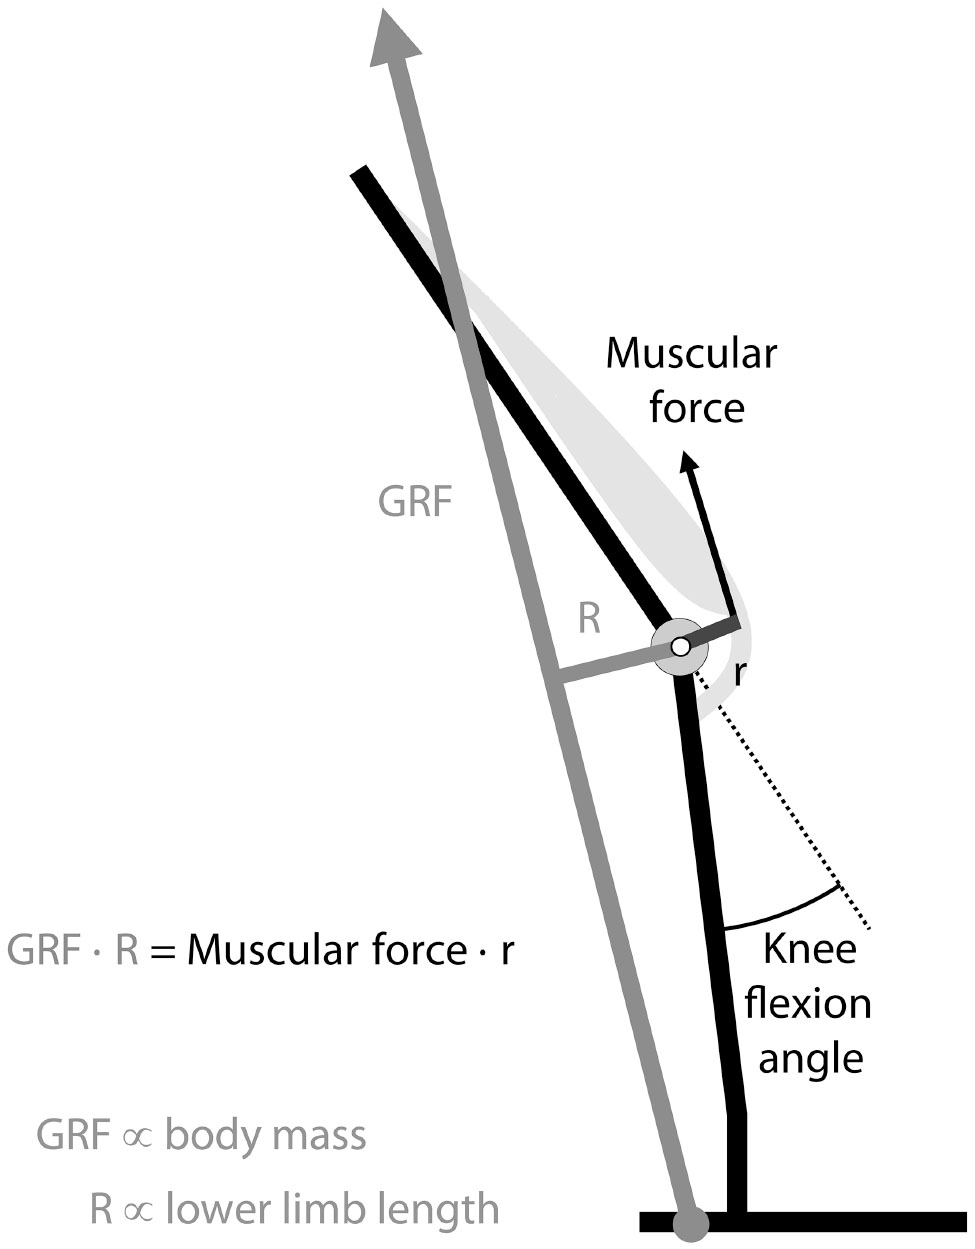 The effect of trunk flexion angle on lower limb mechanics during